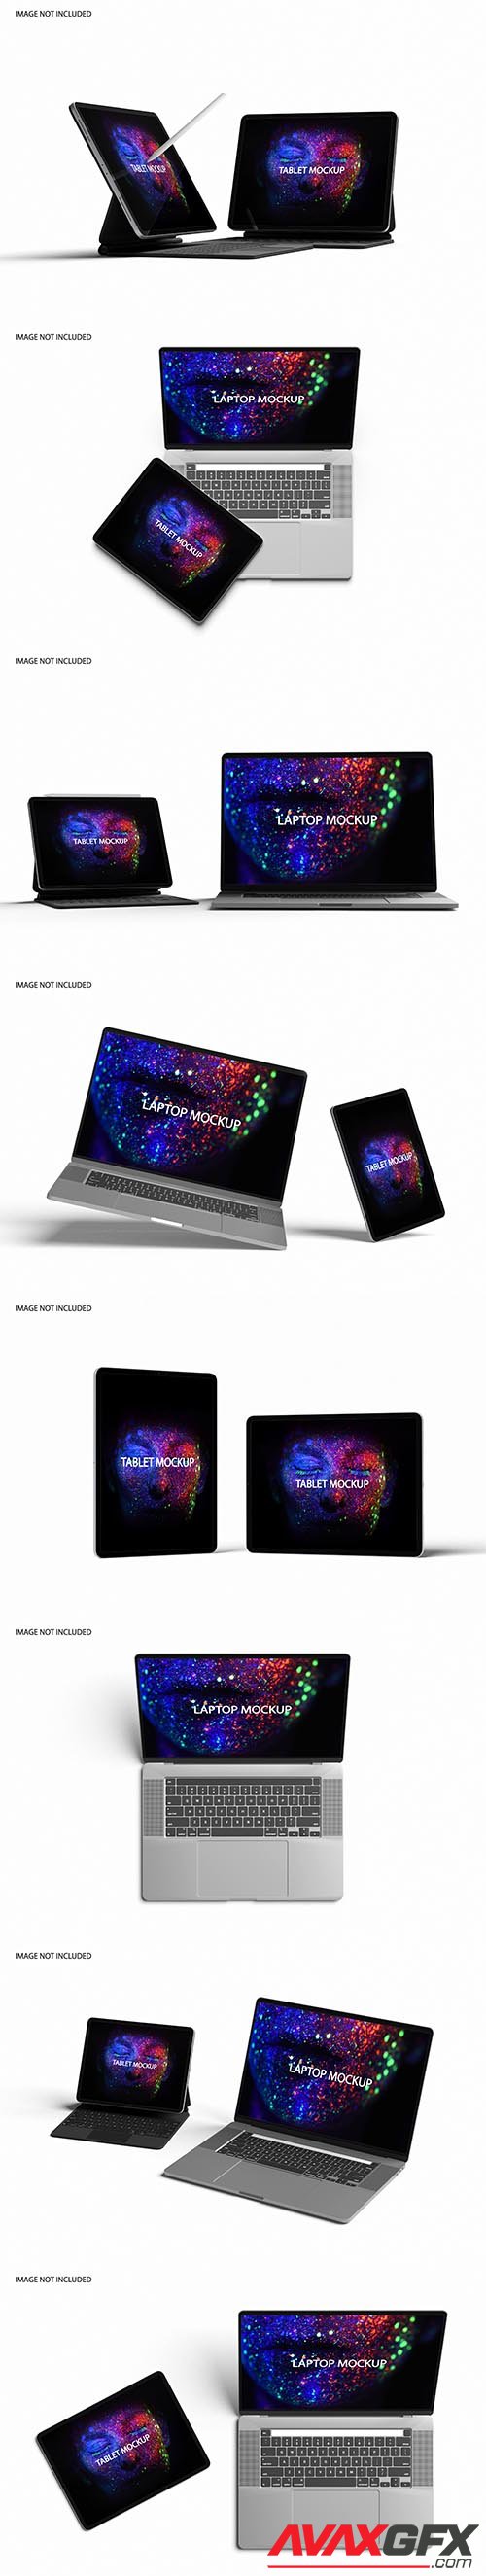 Laptop and tablet mockup